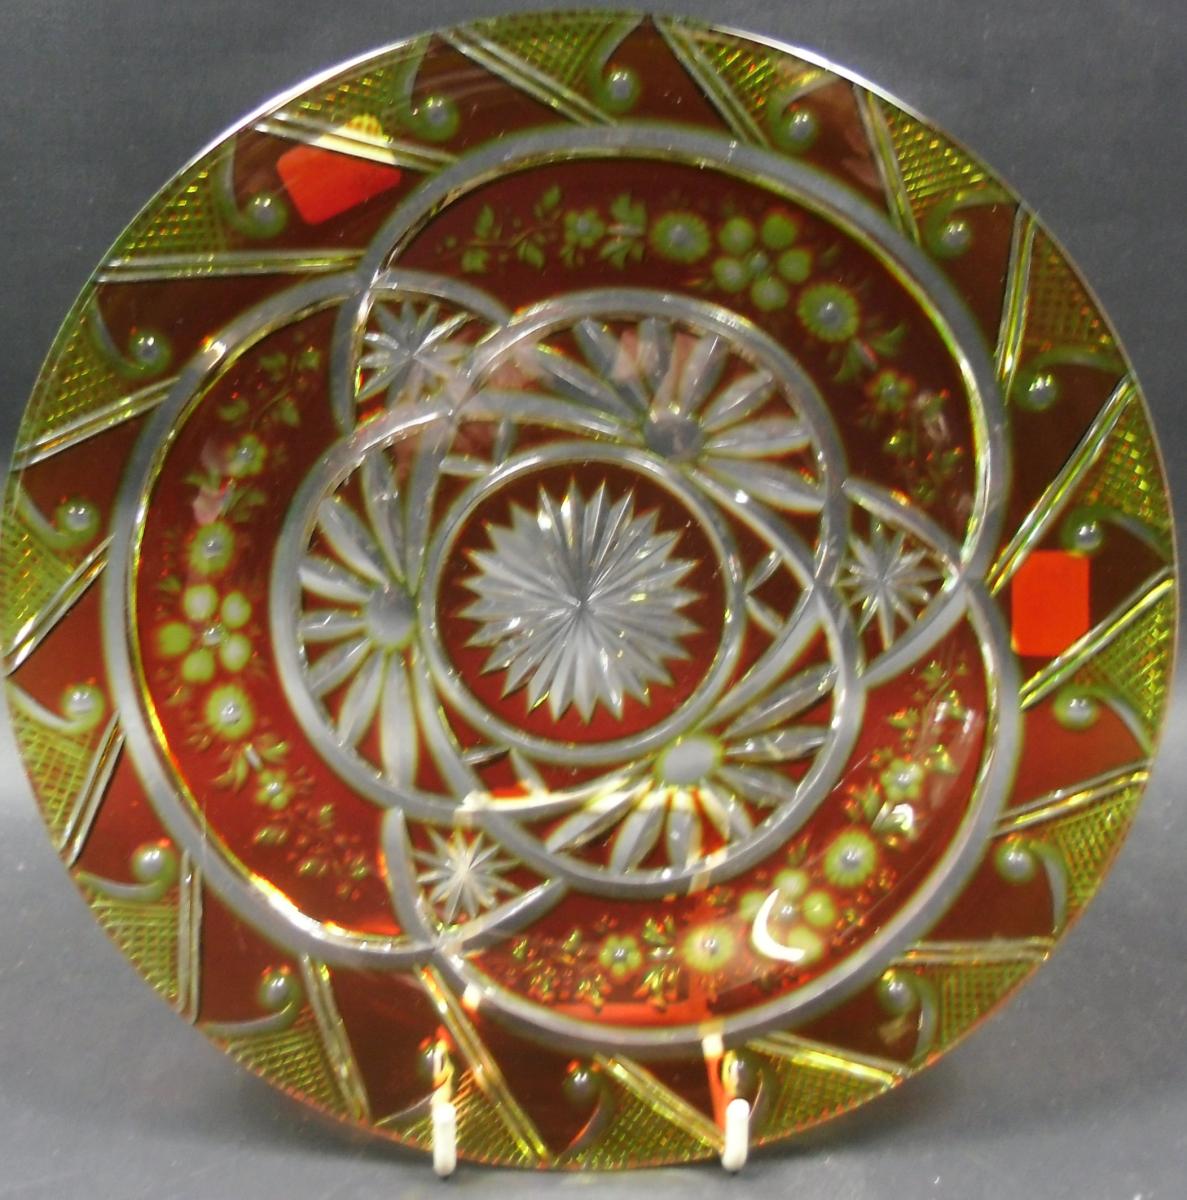 Three layer crystal yellow red glass plate Stevens & Williams, circa 1890